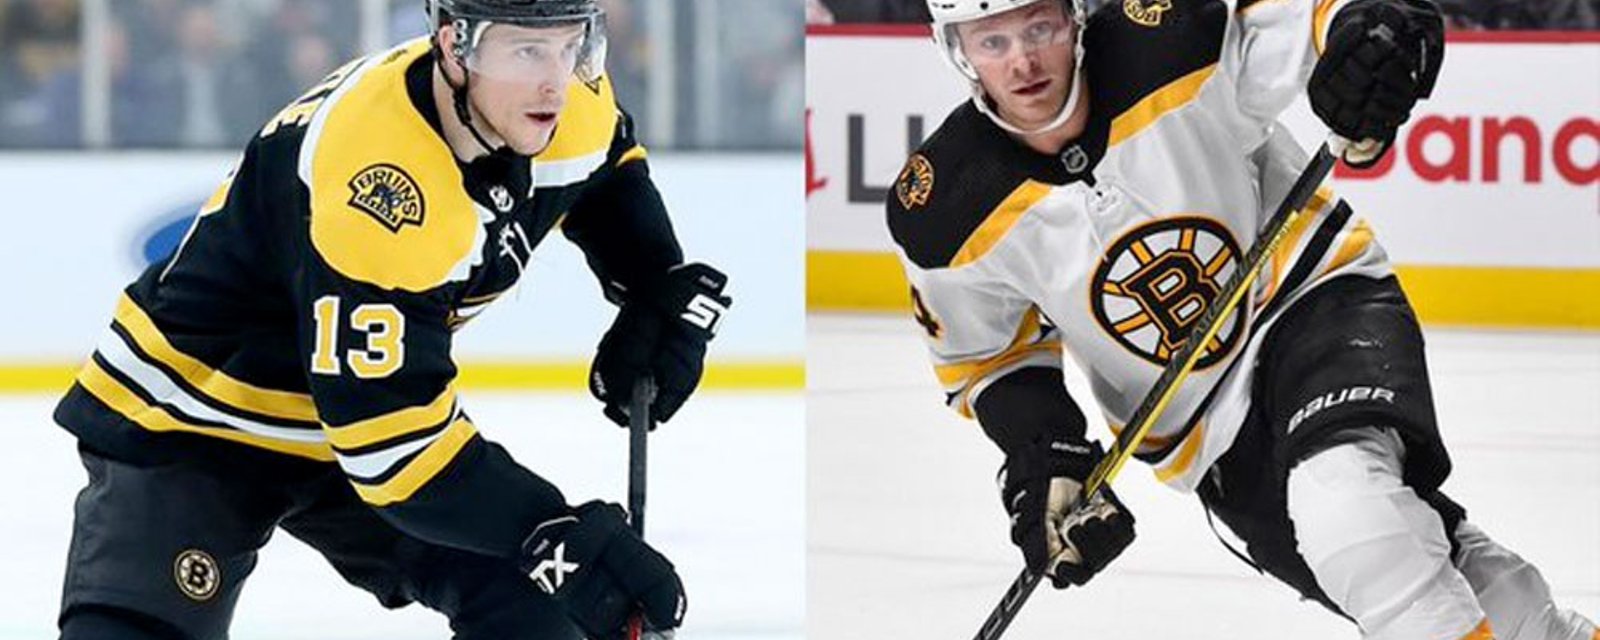 Bruins lock up Coyle and Wagner to big contracts